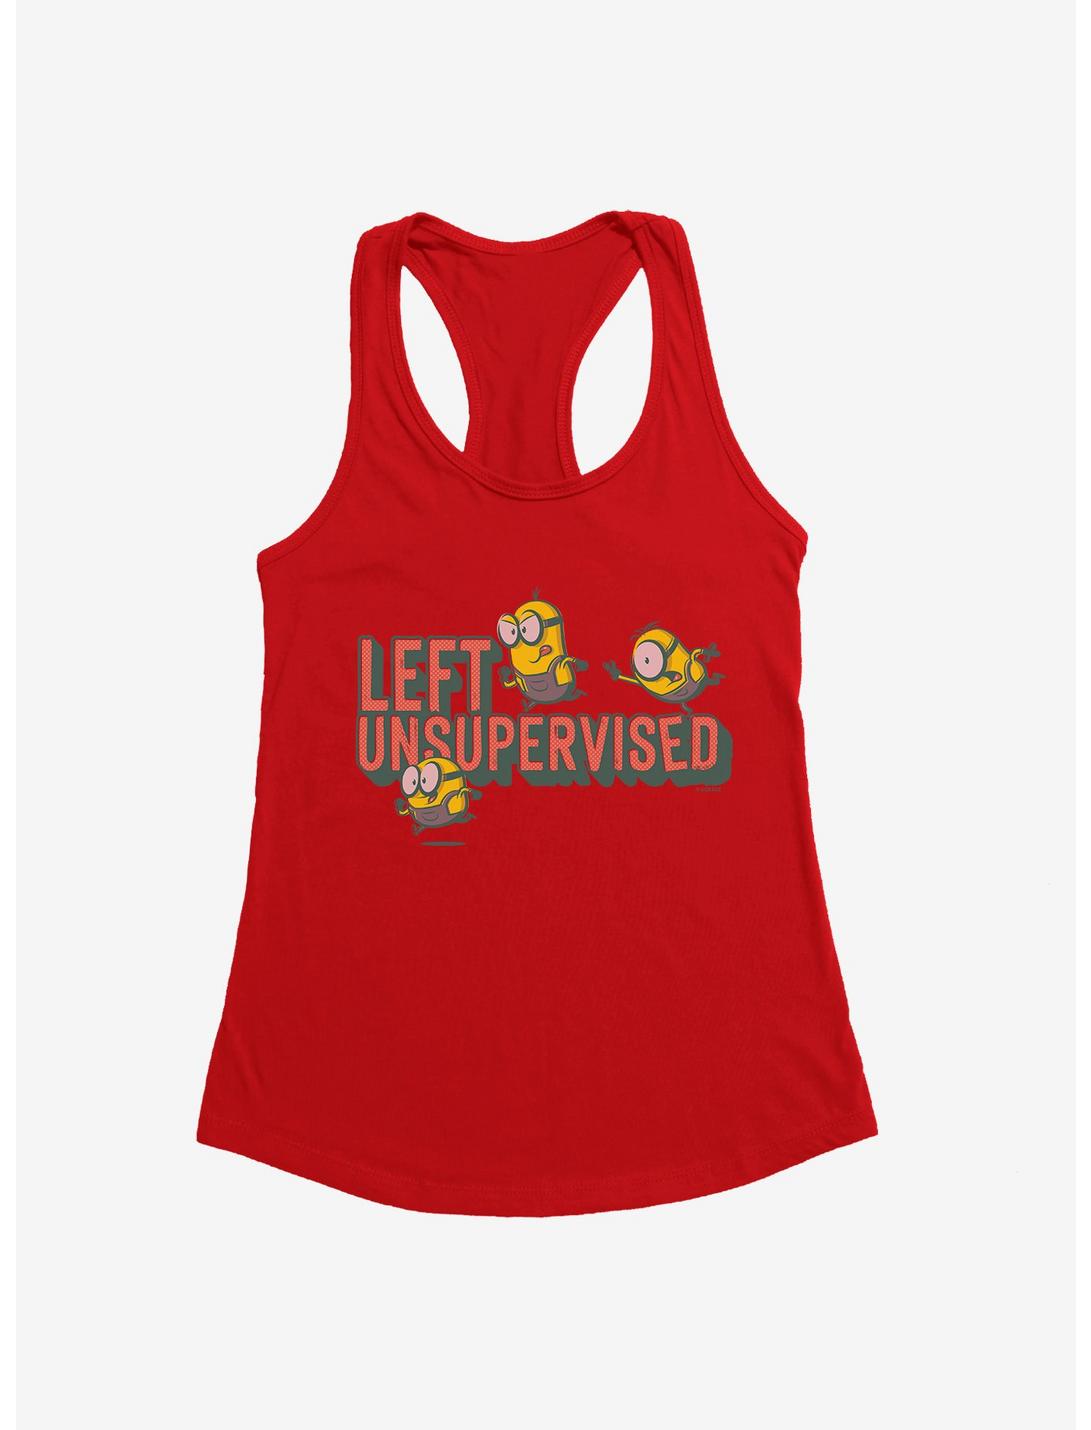 Minions Bob's Left Unsupervised Girls Tank, RED, hi-res